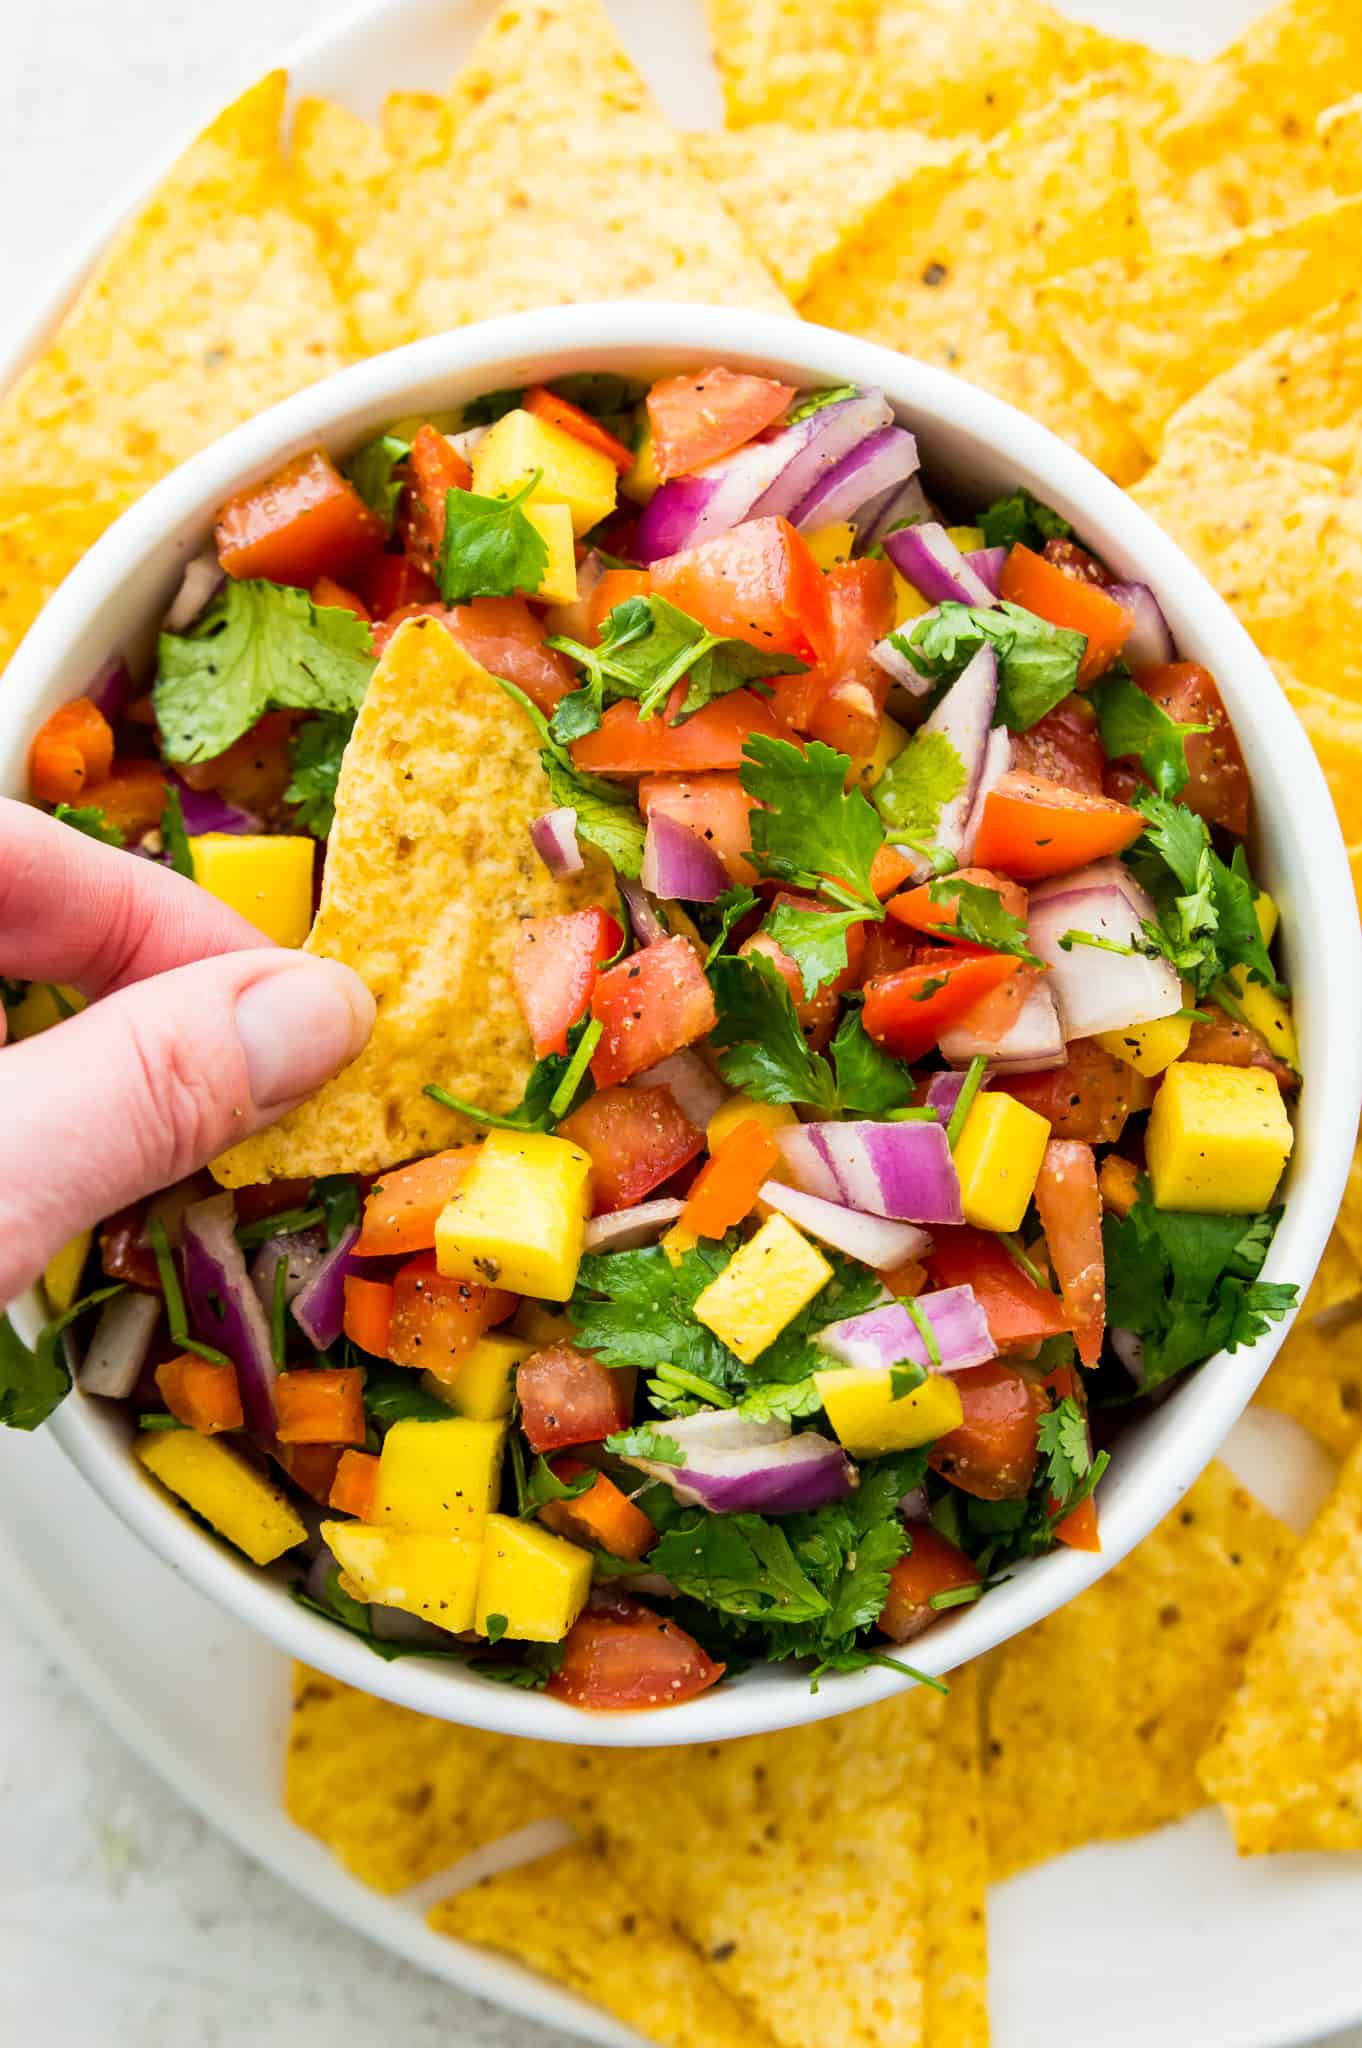 A hand dipping a corn tortilla chip into a bowl of mango salsa with tomatoes and red onions.